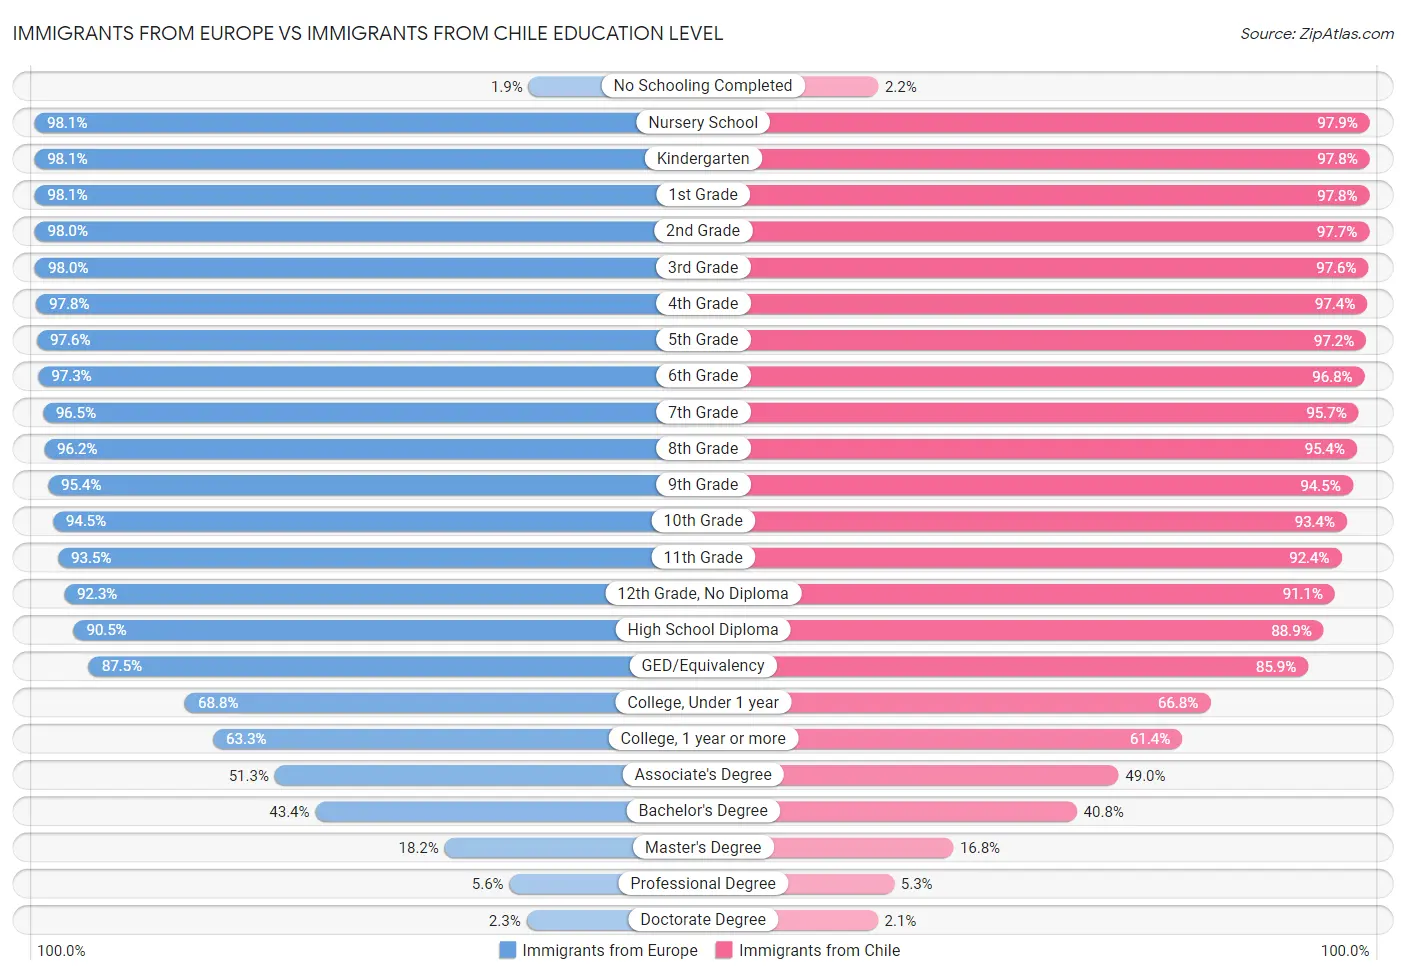 Immigrants from Europe vs Immigrants from Chile Education Level